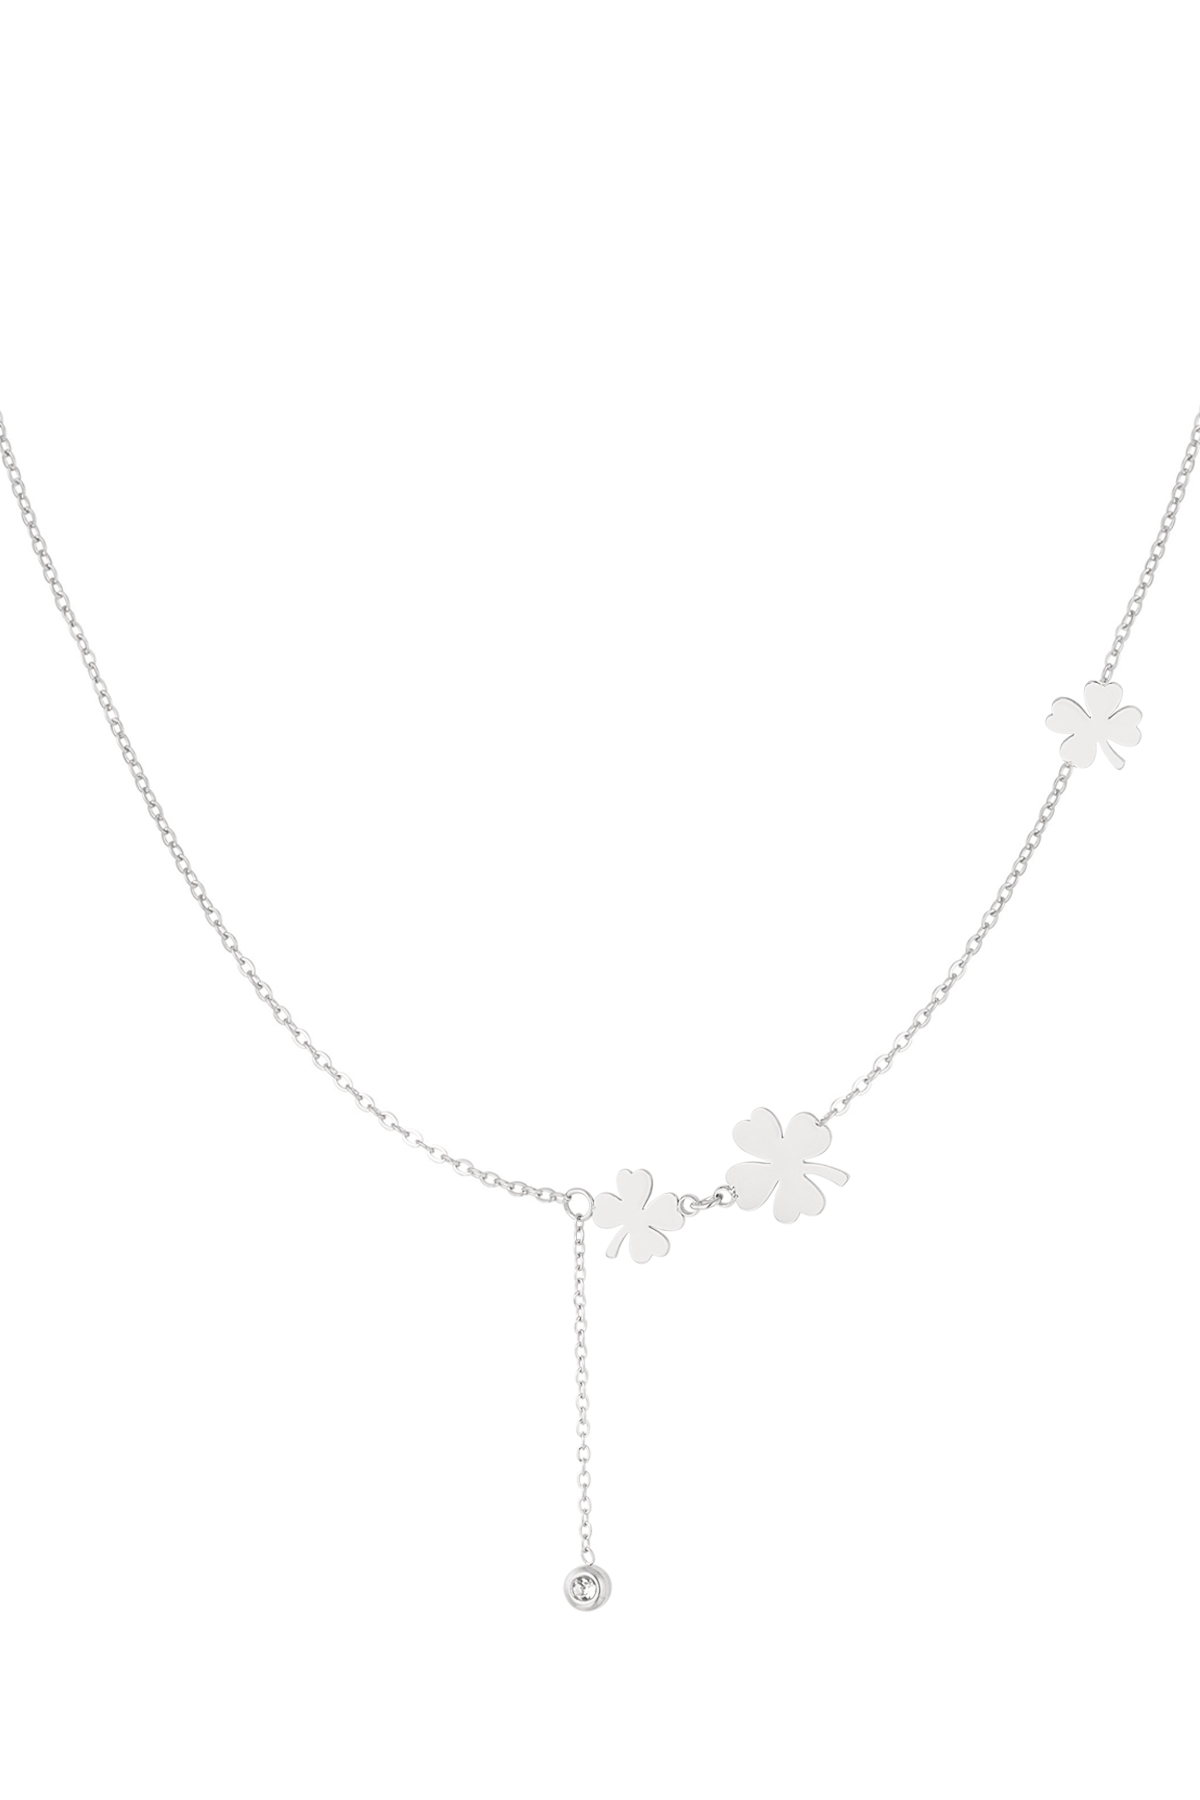 Necklace three clovers and stone - silver h5 